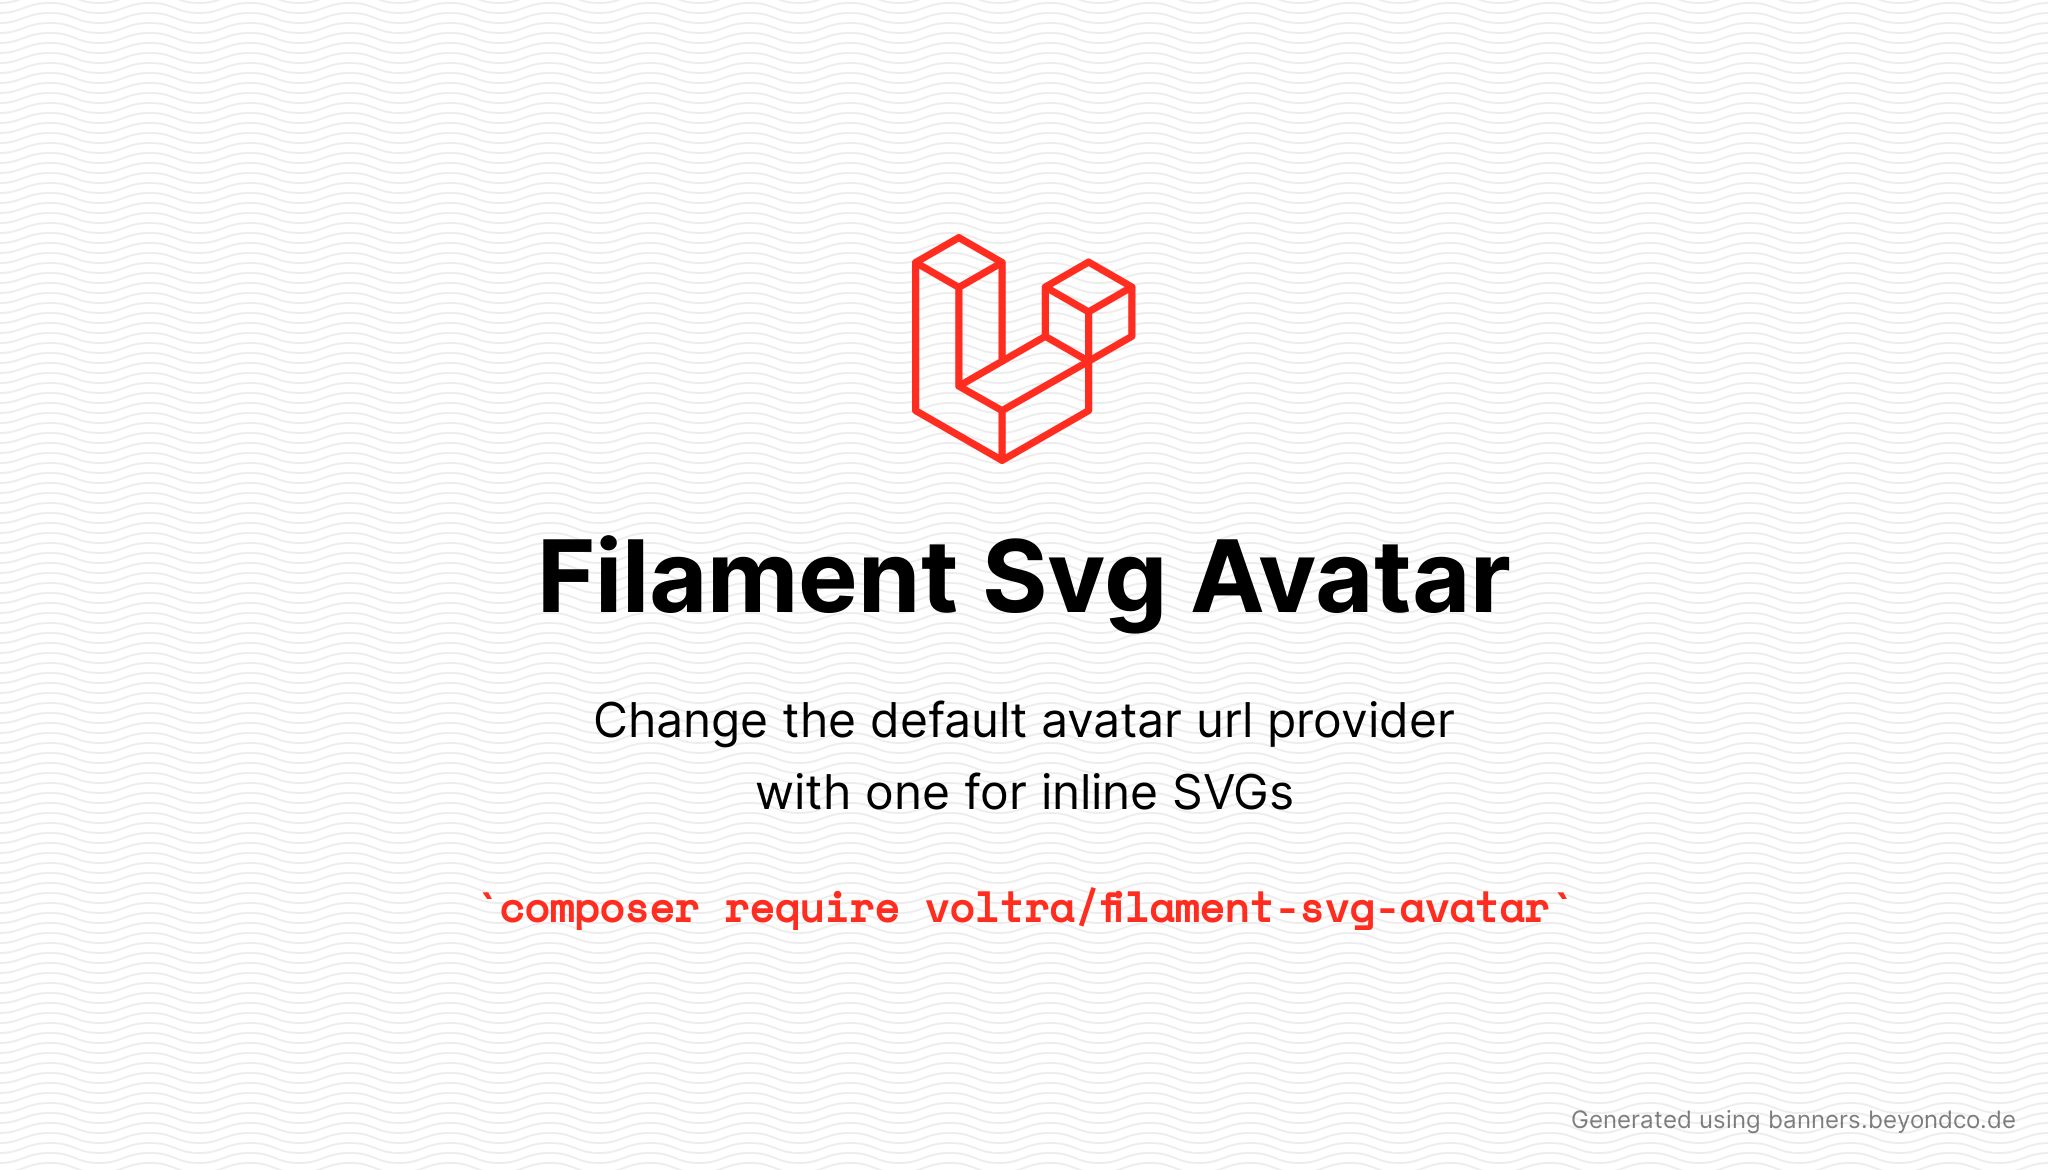 Filament Svg Avatar: Change the default avatar url provider with one for inline SVGs